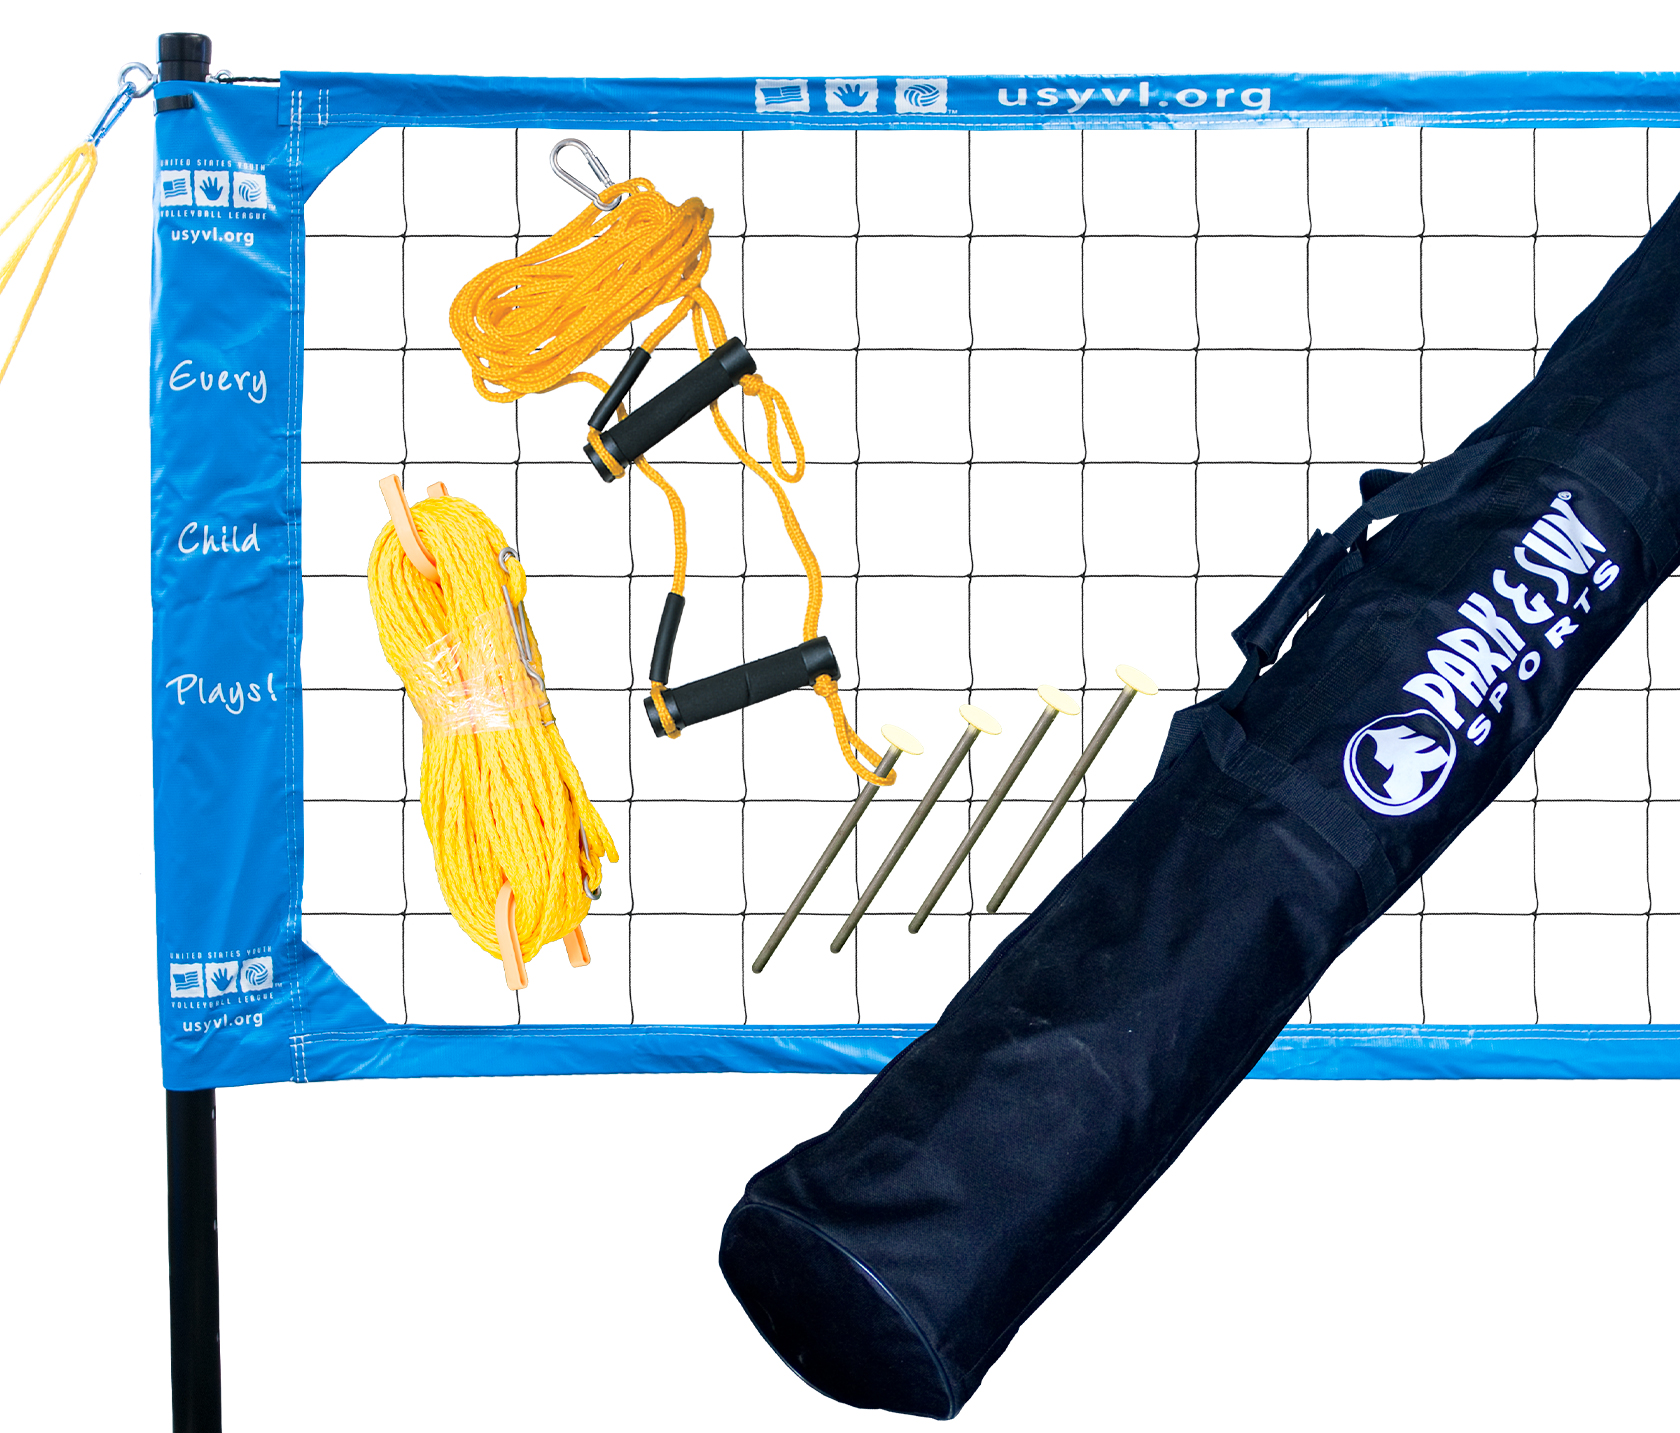 The Spectrum USYVL features our volleyball regulation size Spectrum net, which measures 32' L x 3' H, and is pre-attached to the poles. The net tapes are 2 in. top and bottom with reinforced corners and 6 in. side sleeves, which distributes the net tension evenly from the top to the bottom of the net.